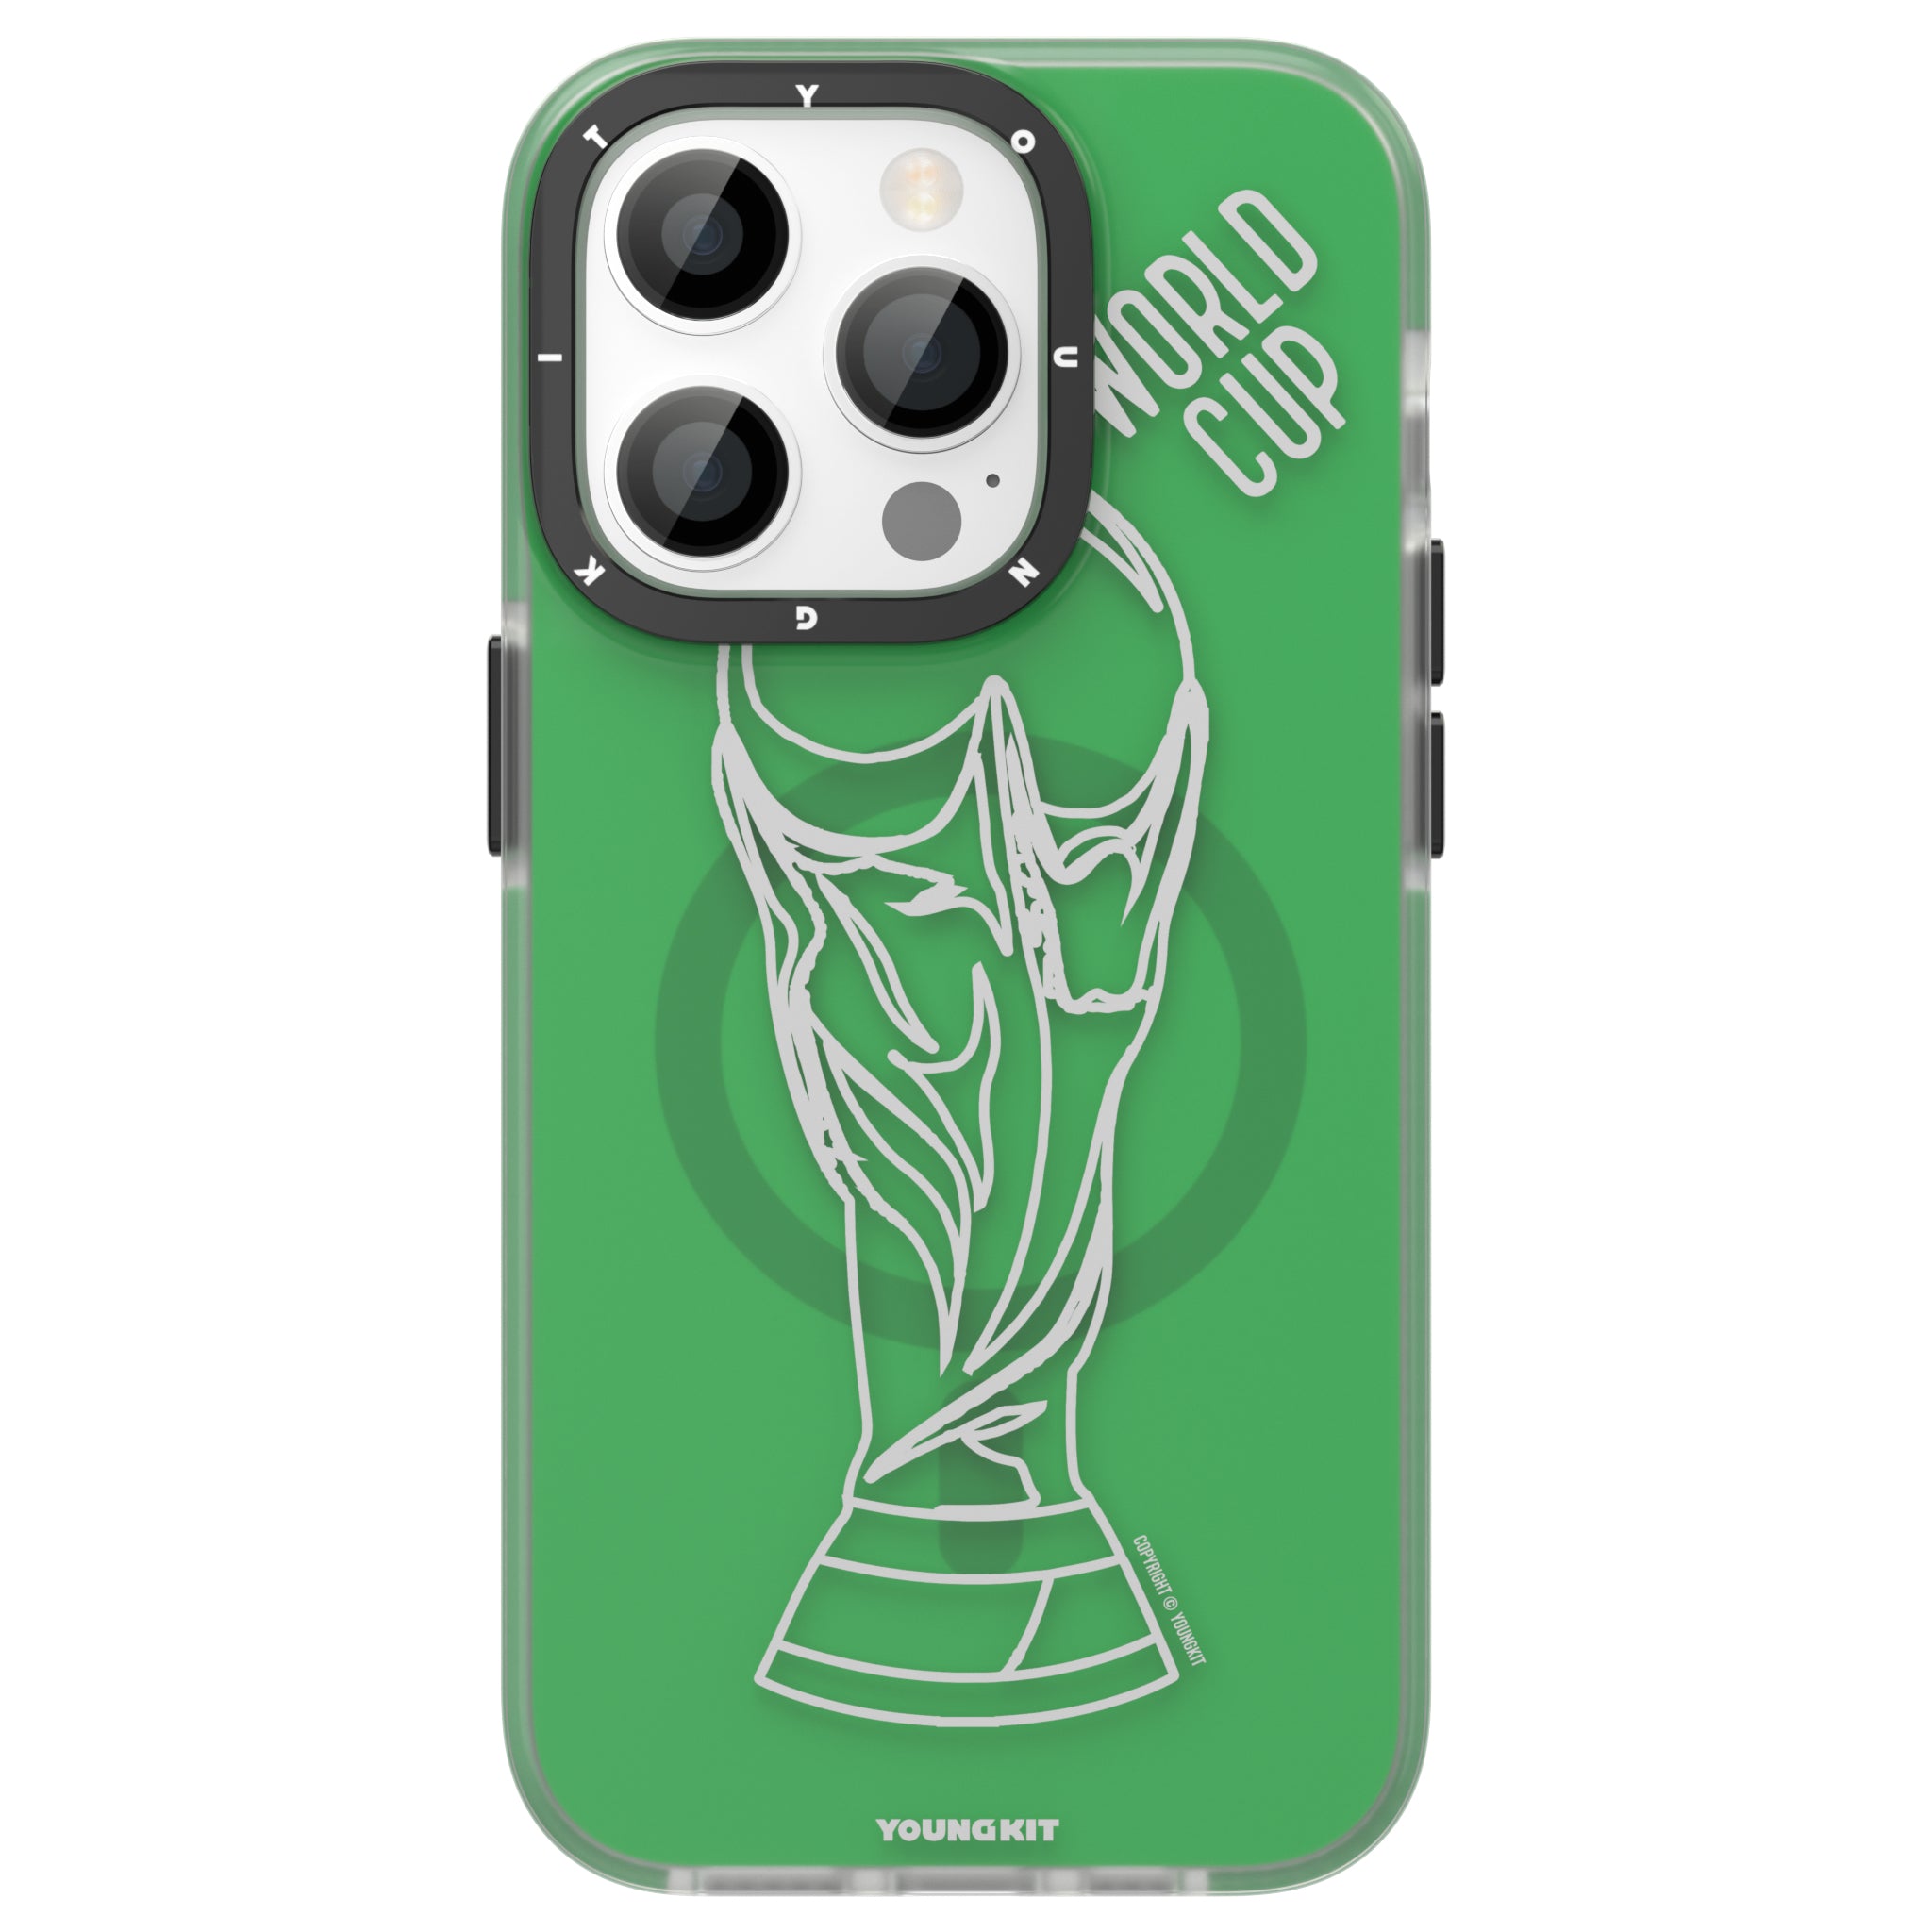 World Cup Trophy MagSafe iPhone13/14 Case